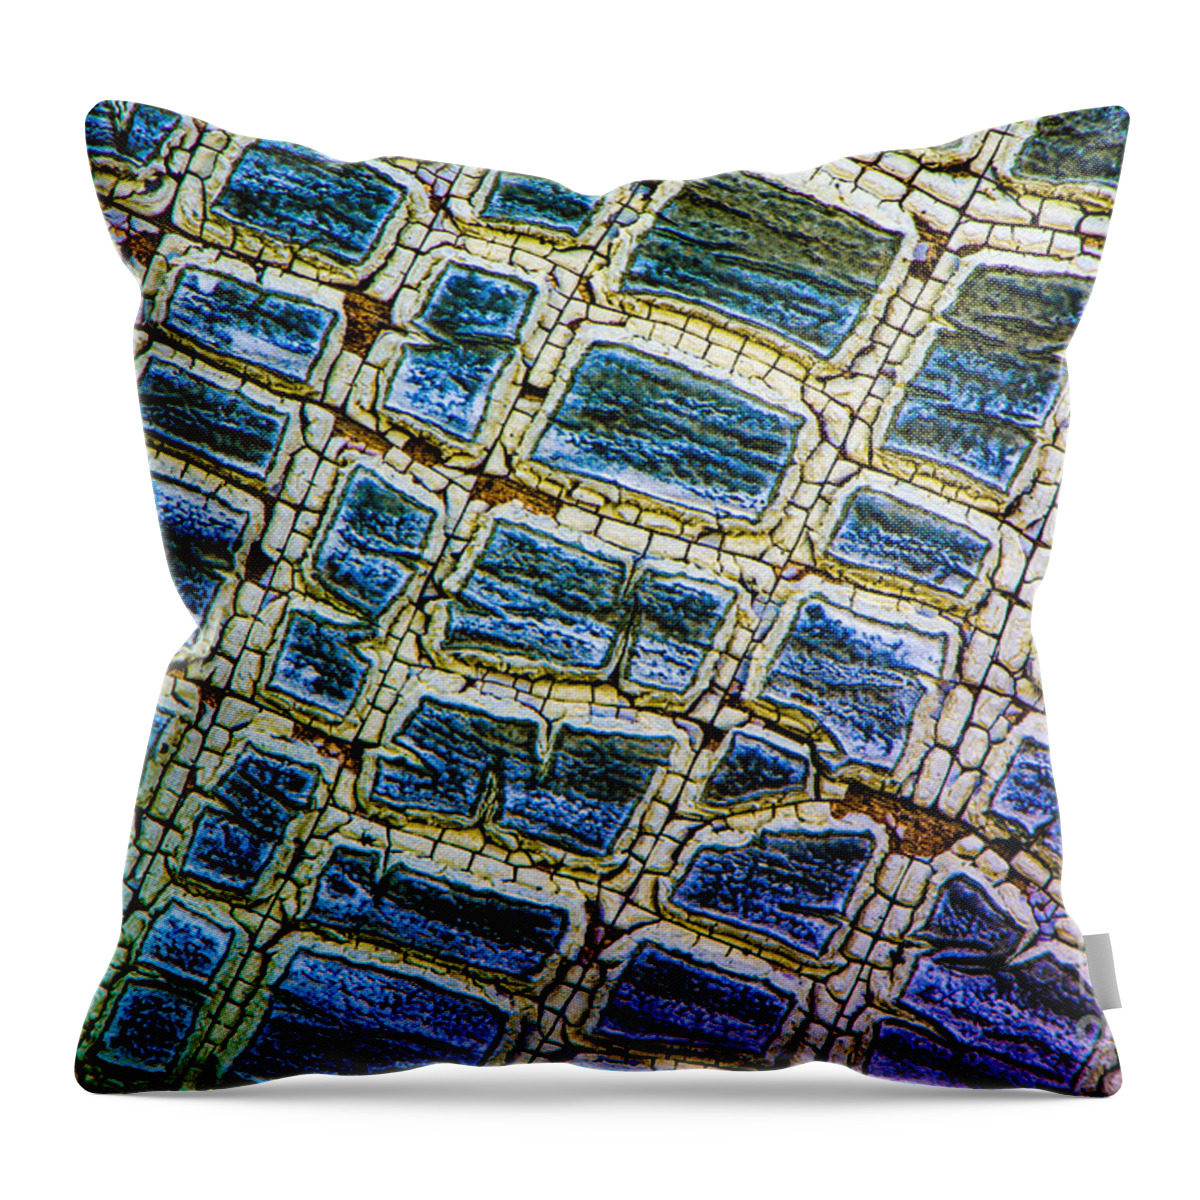 Building Throw Pillow featuring the photograph Painted Streets Number 1 by Michael Arend